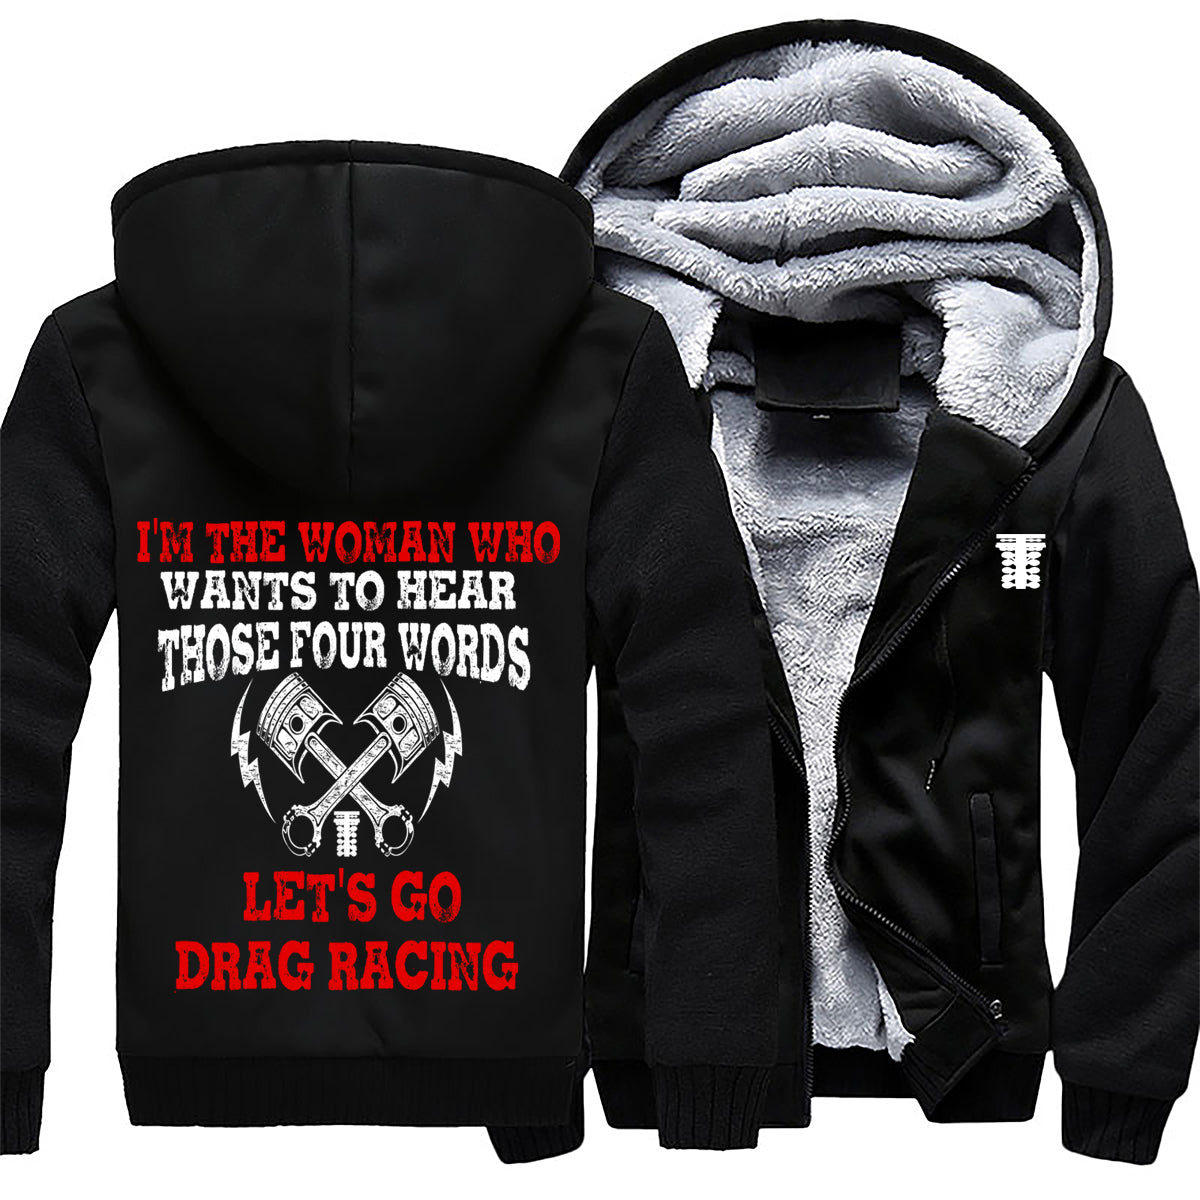 I'm The Woman Who Wants To hear Those 4 Words Let's Go Drag Racing Jacket 